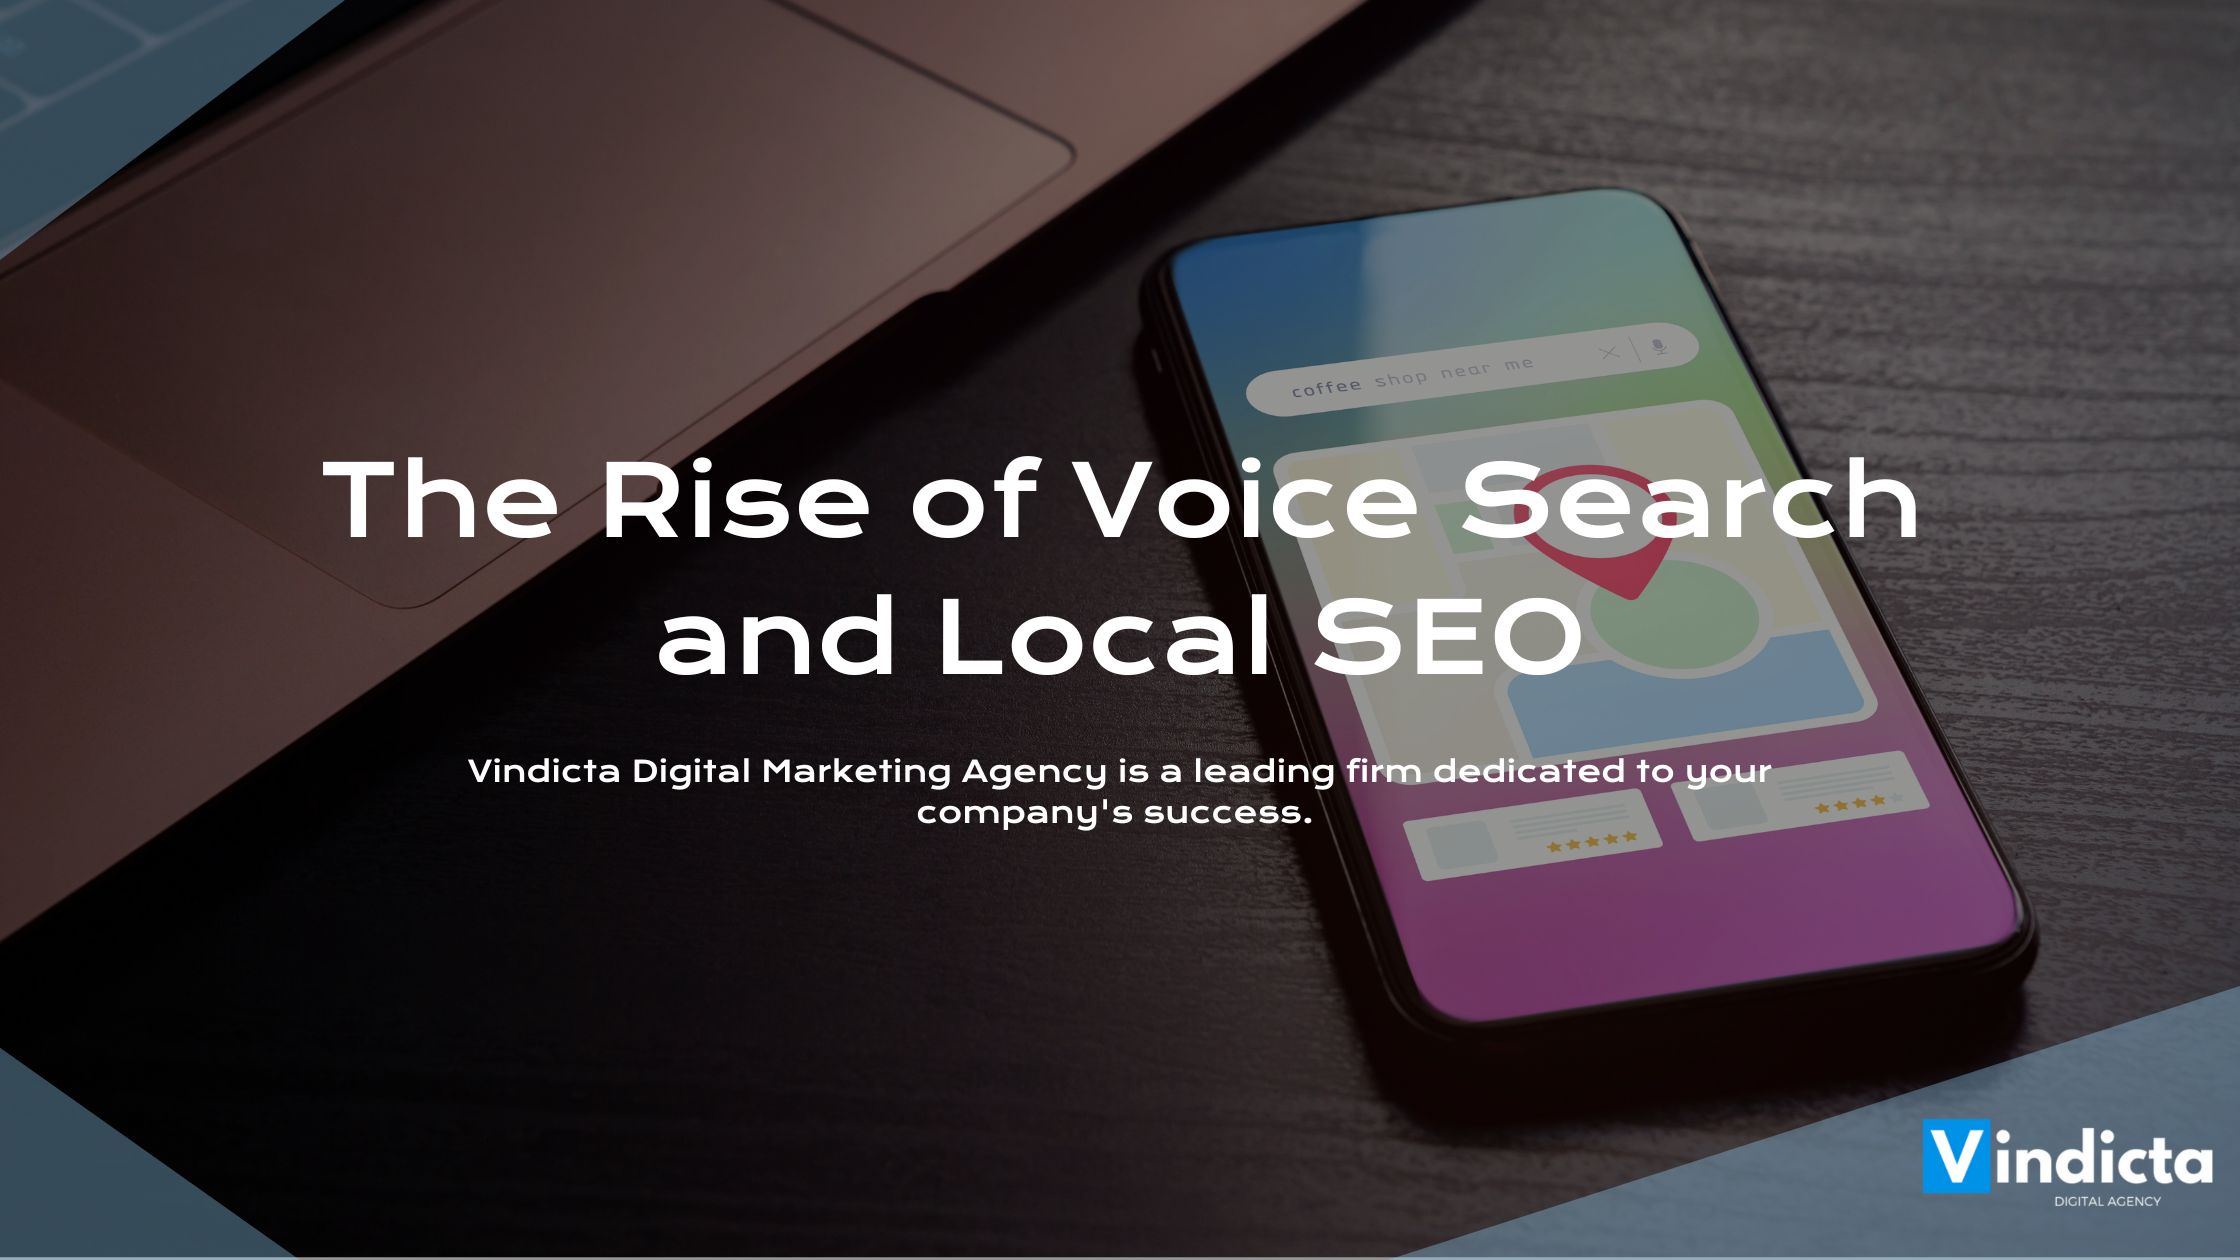 The Rise of Voice Search and Local SEO